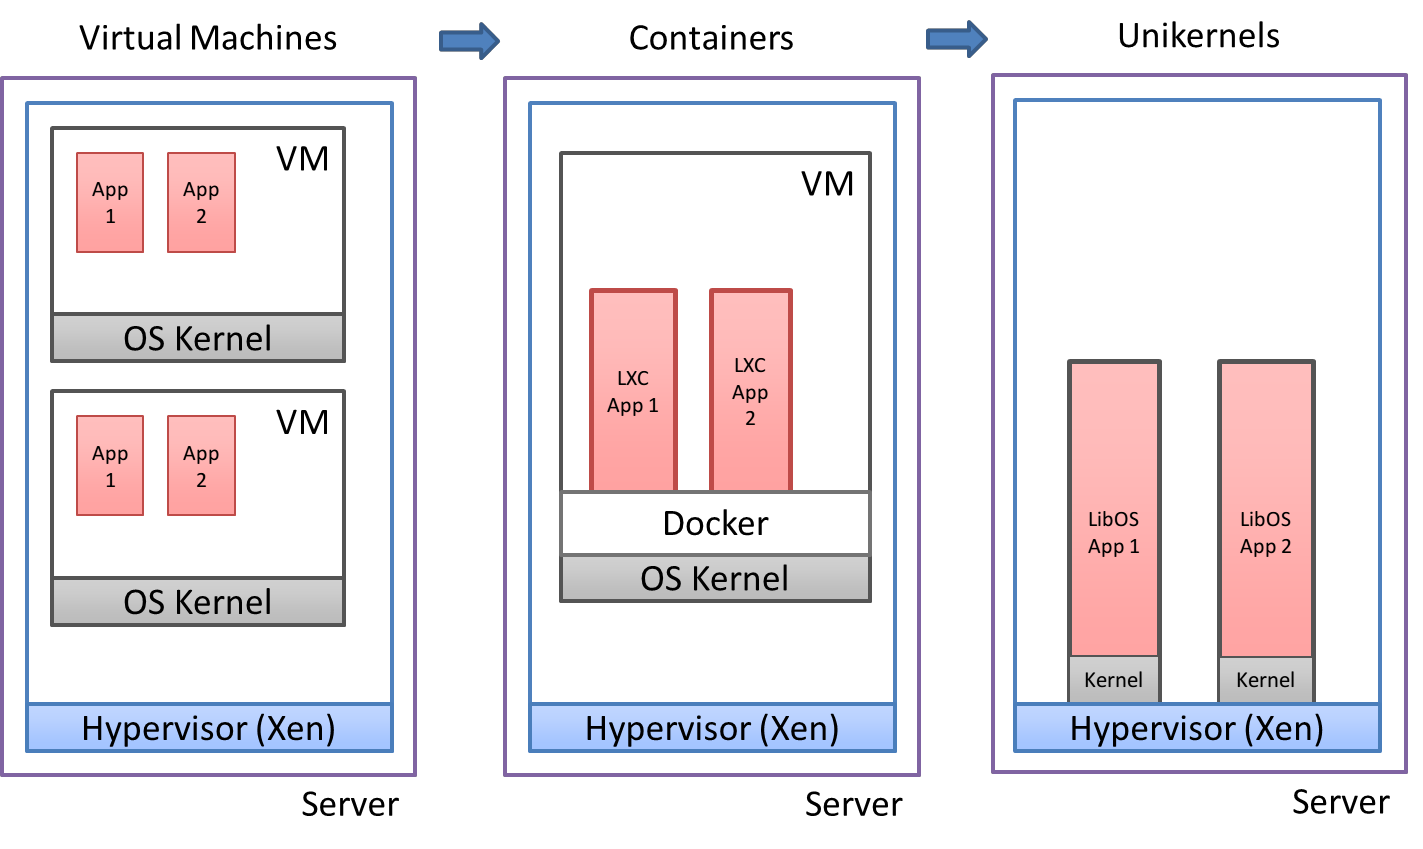 Evolution of virtualization vehicules: VMs, containers, Unikernels